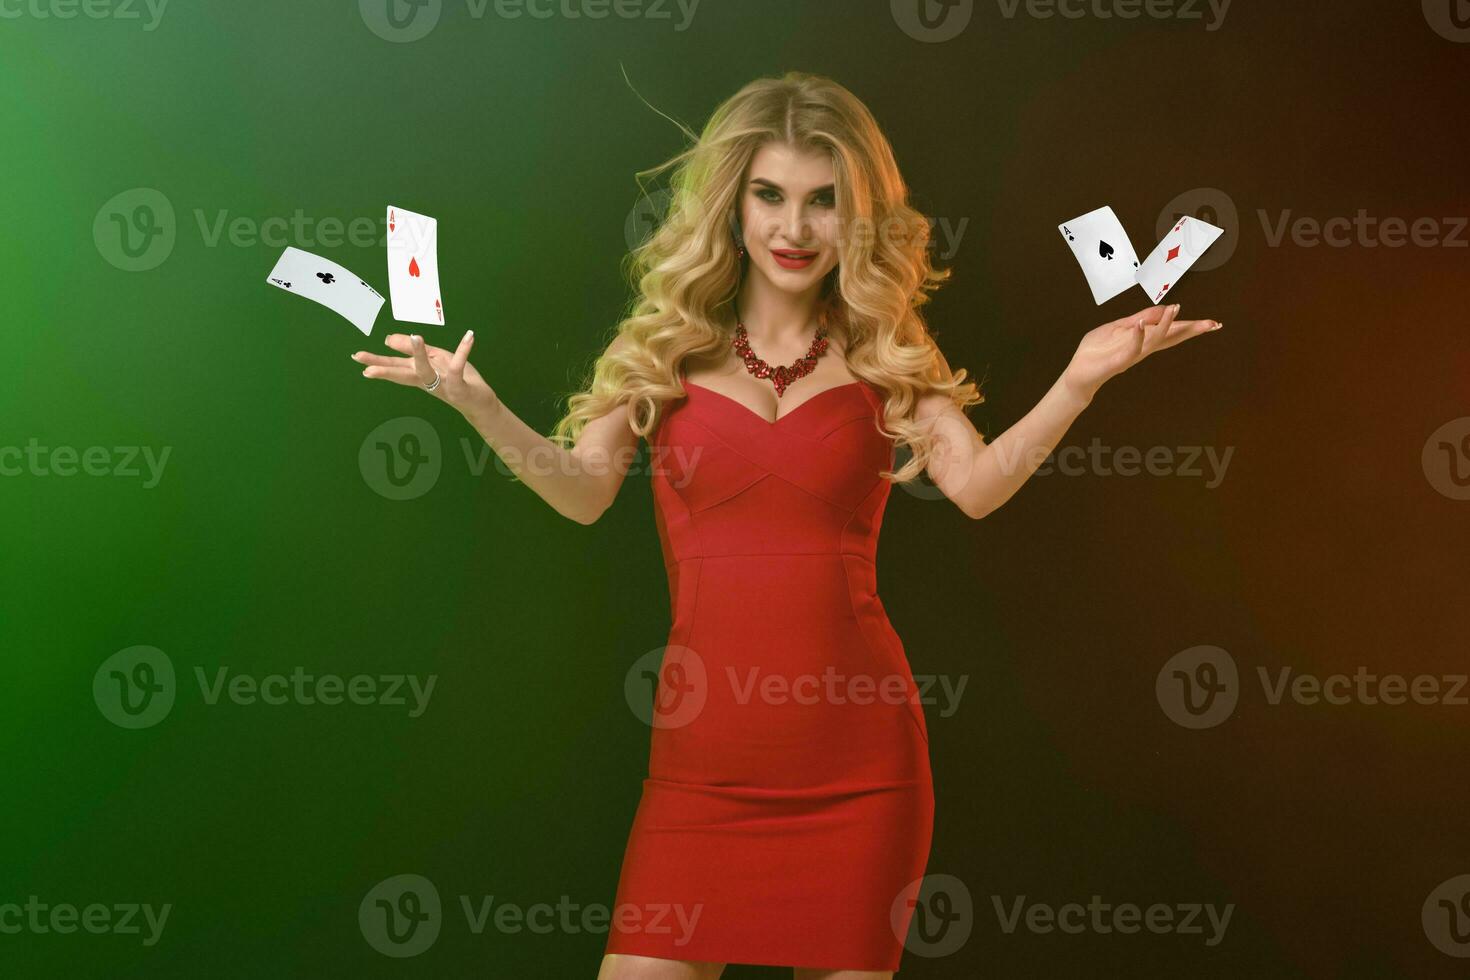 Blonde model, bright make-up, in red fitting dress and necklace. Holding or throwing something, posing on colorful background. Copy space, close up photo